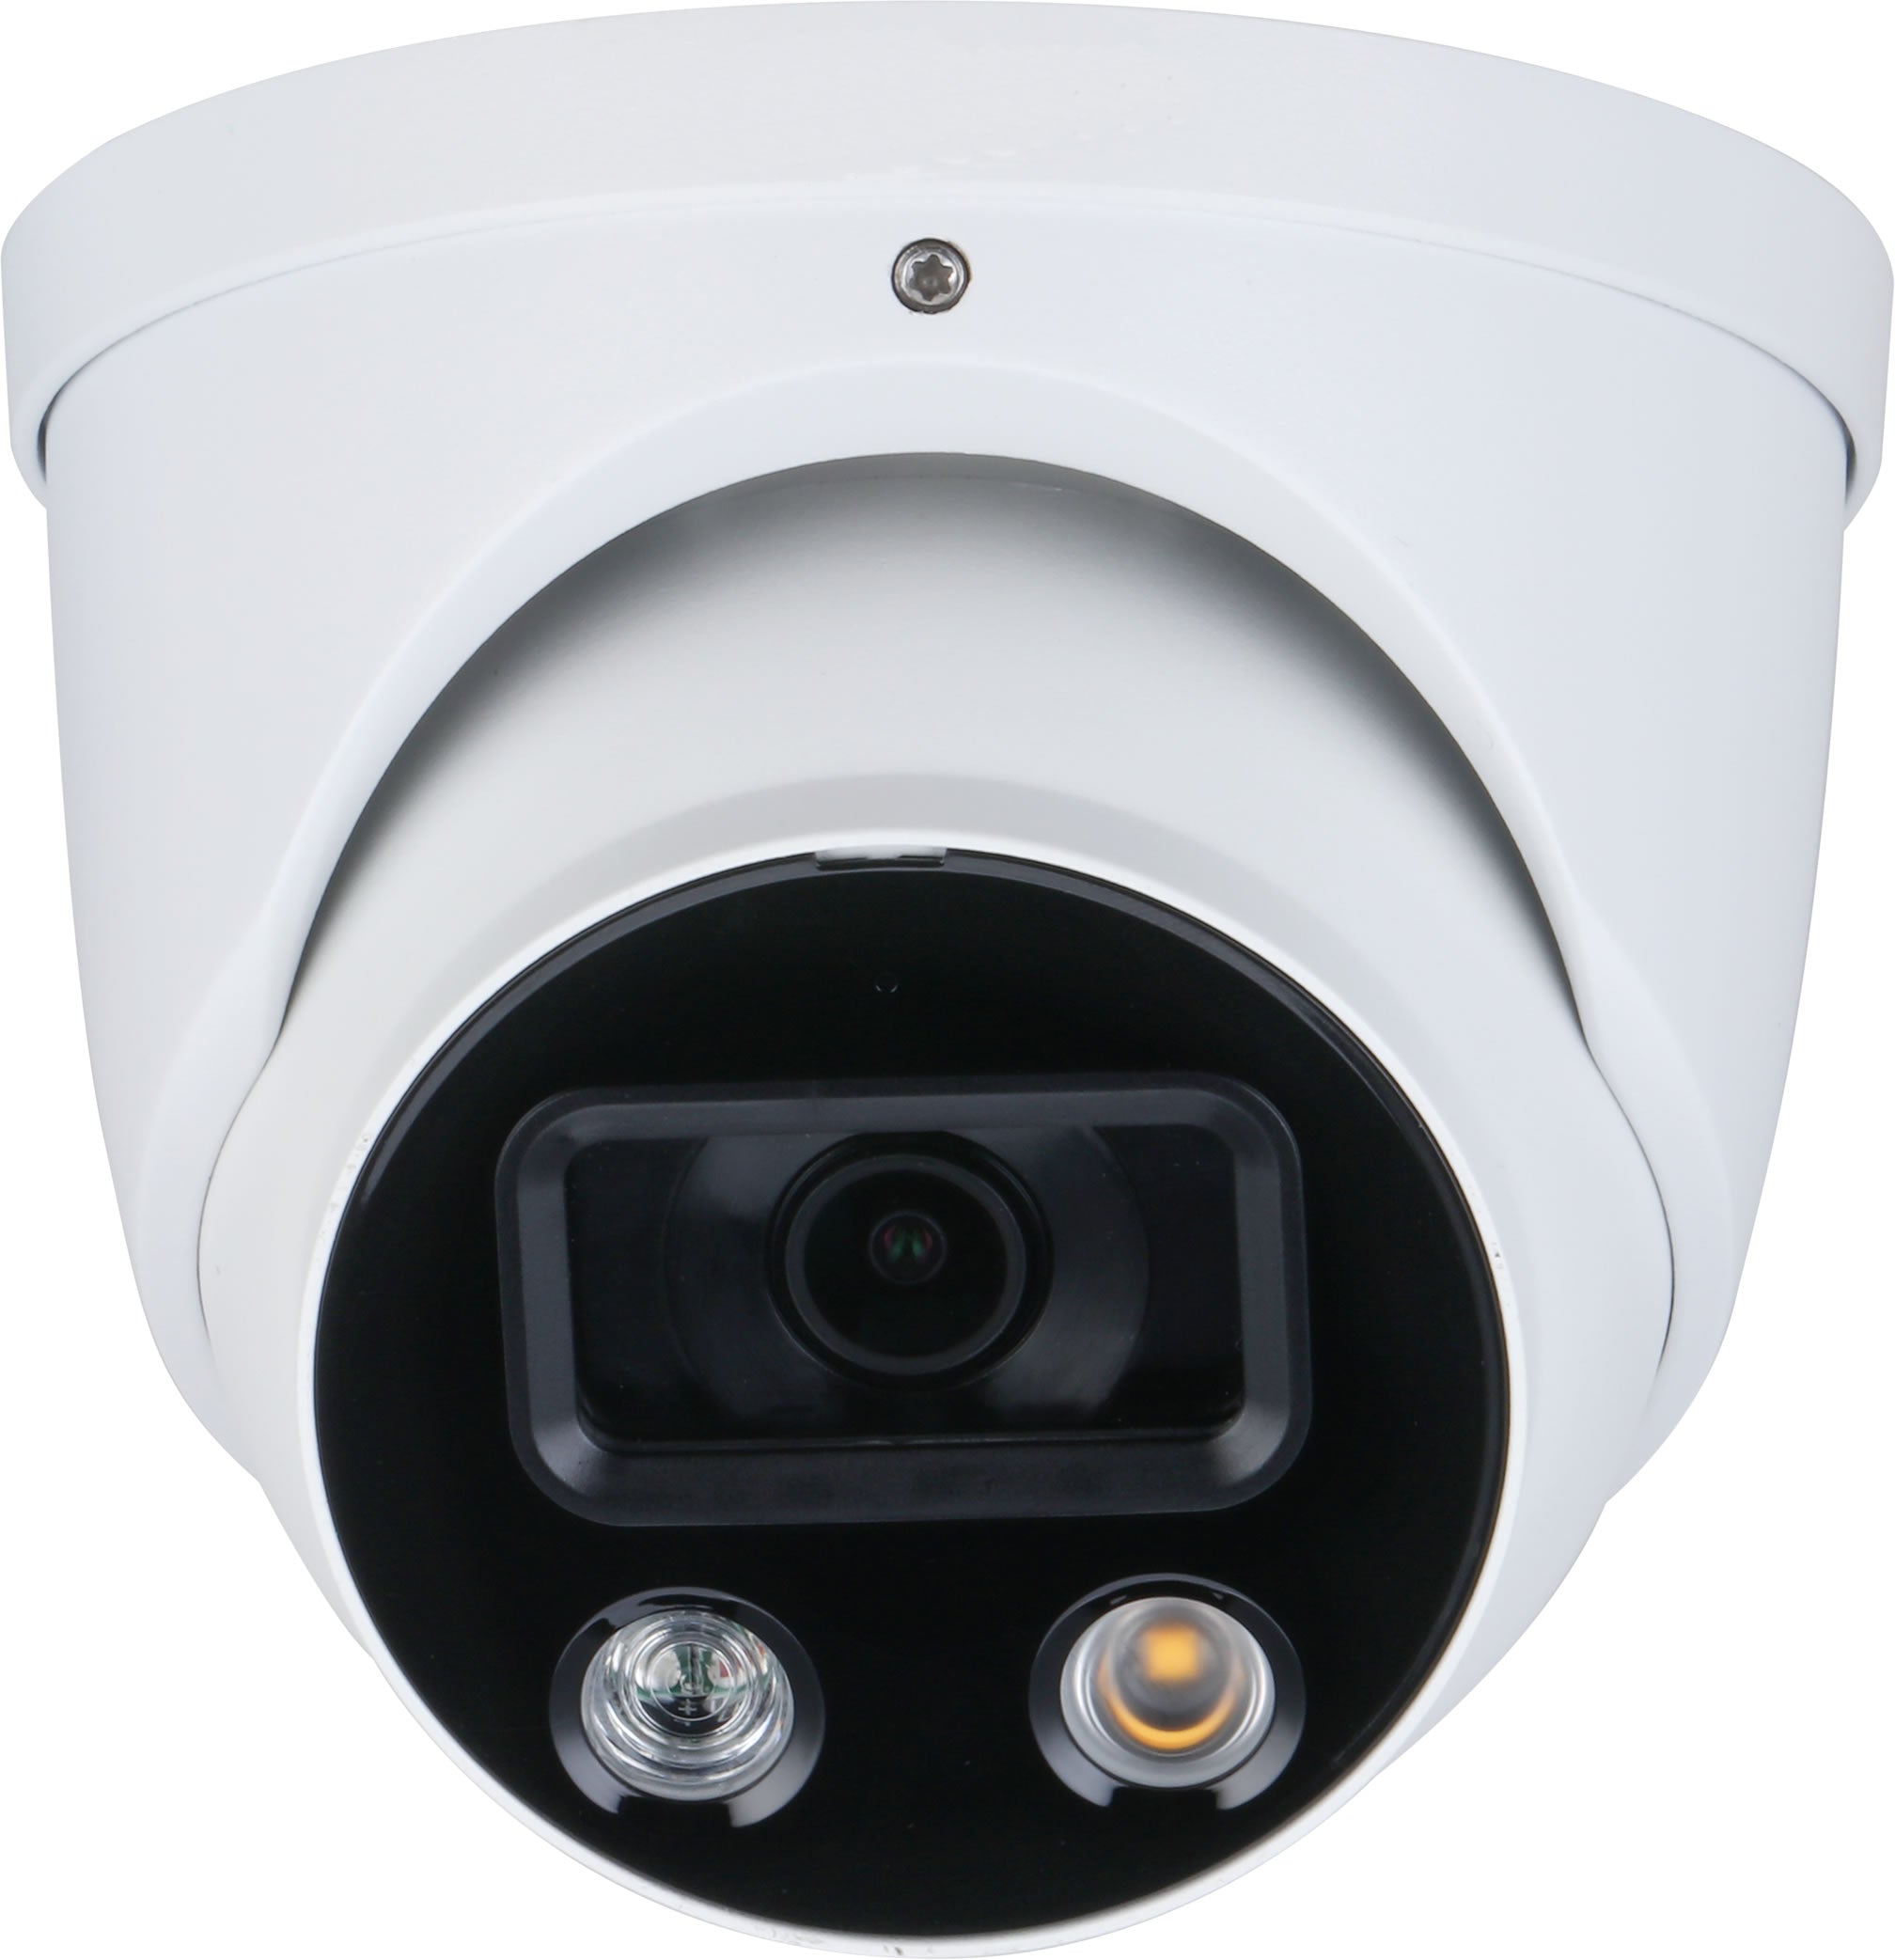 23-4D38A49H-ASP 8MP Full-color Active Deterrence Fixed-focal Eyeball Network Camera